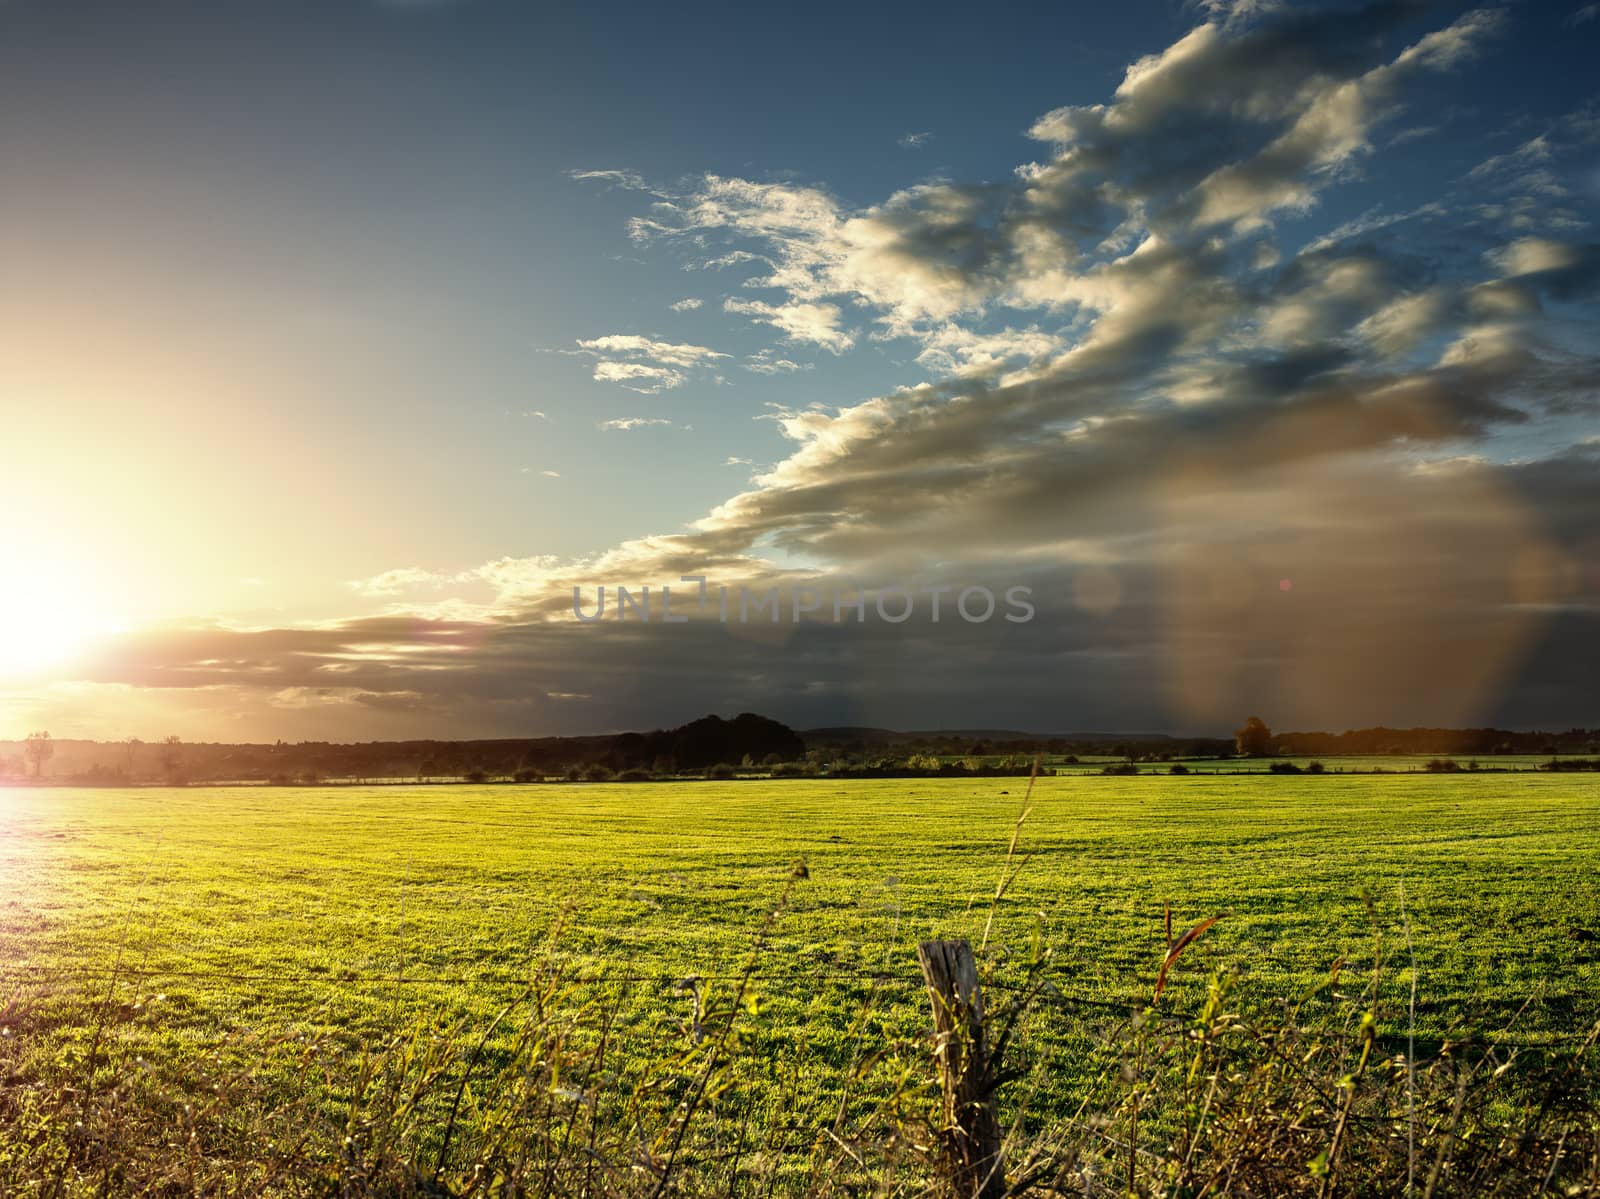 Field of grass on a sunny autumn or spring day. Backlite shot with nice lens flare